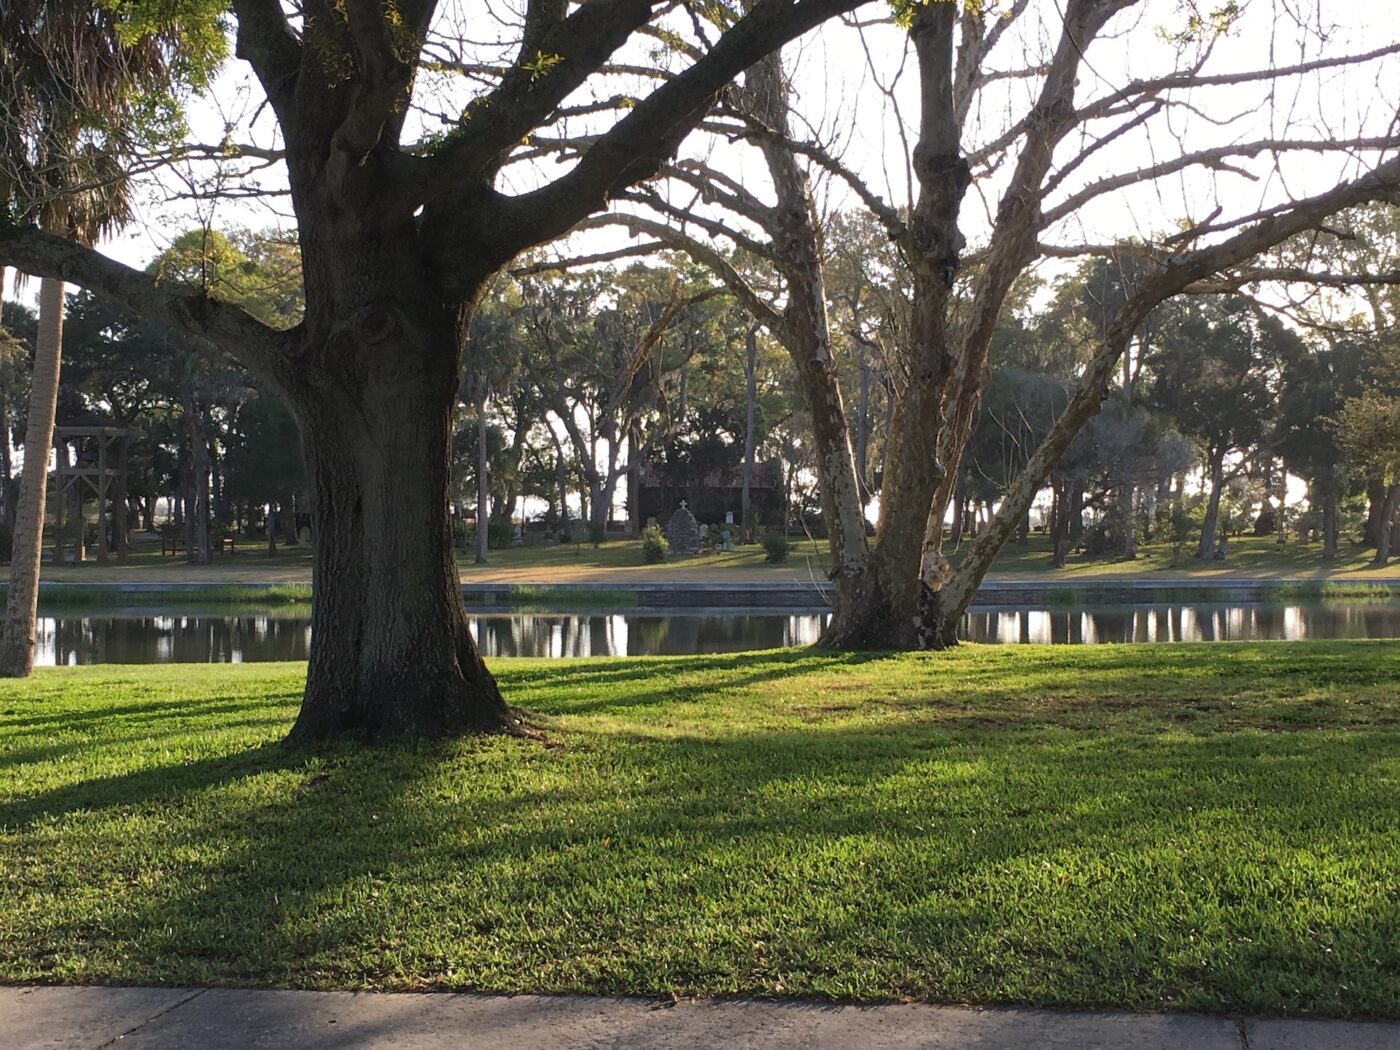 Pictured is the grounds of the Our Lady of La Leche Shrine in St. Augustine, Fllorida. The shrine building is just visible within the trees.